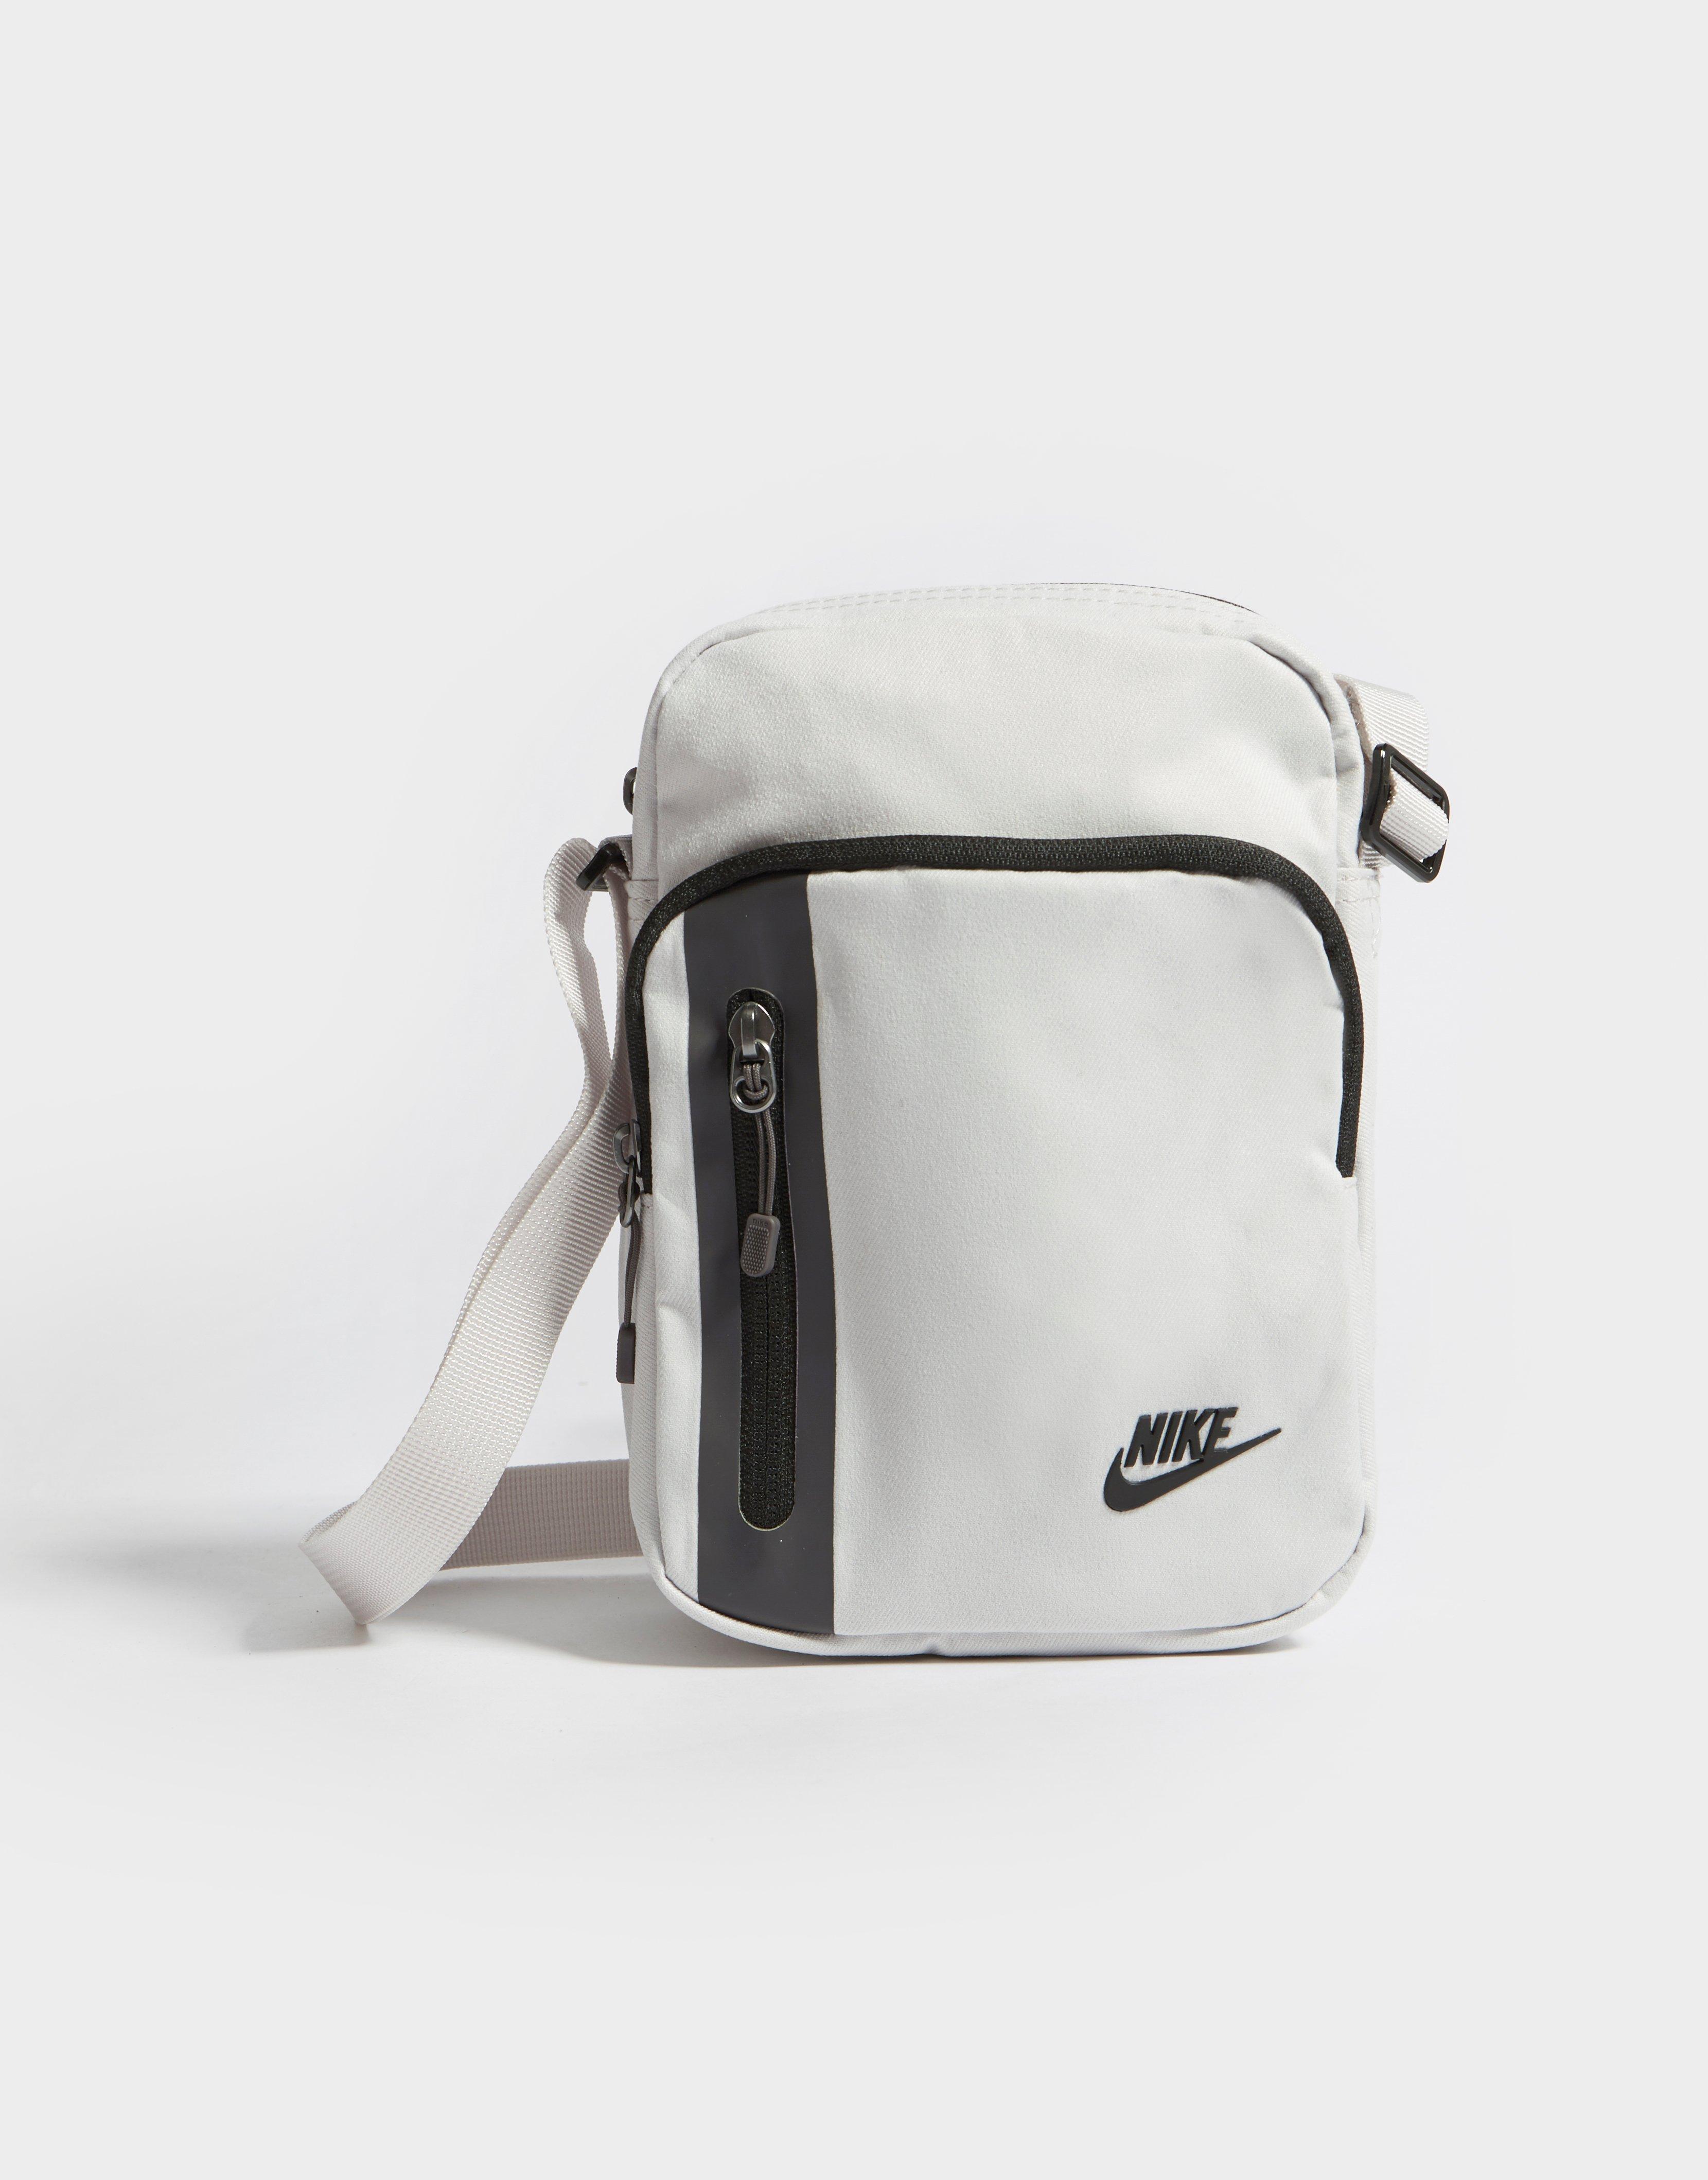 nike core small 3.0 pouch bag